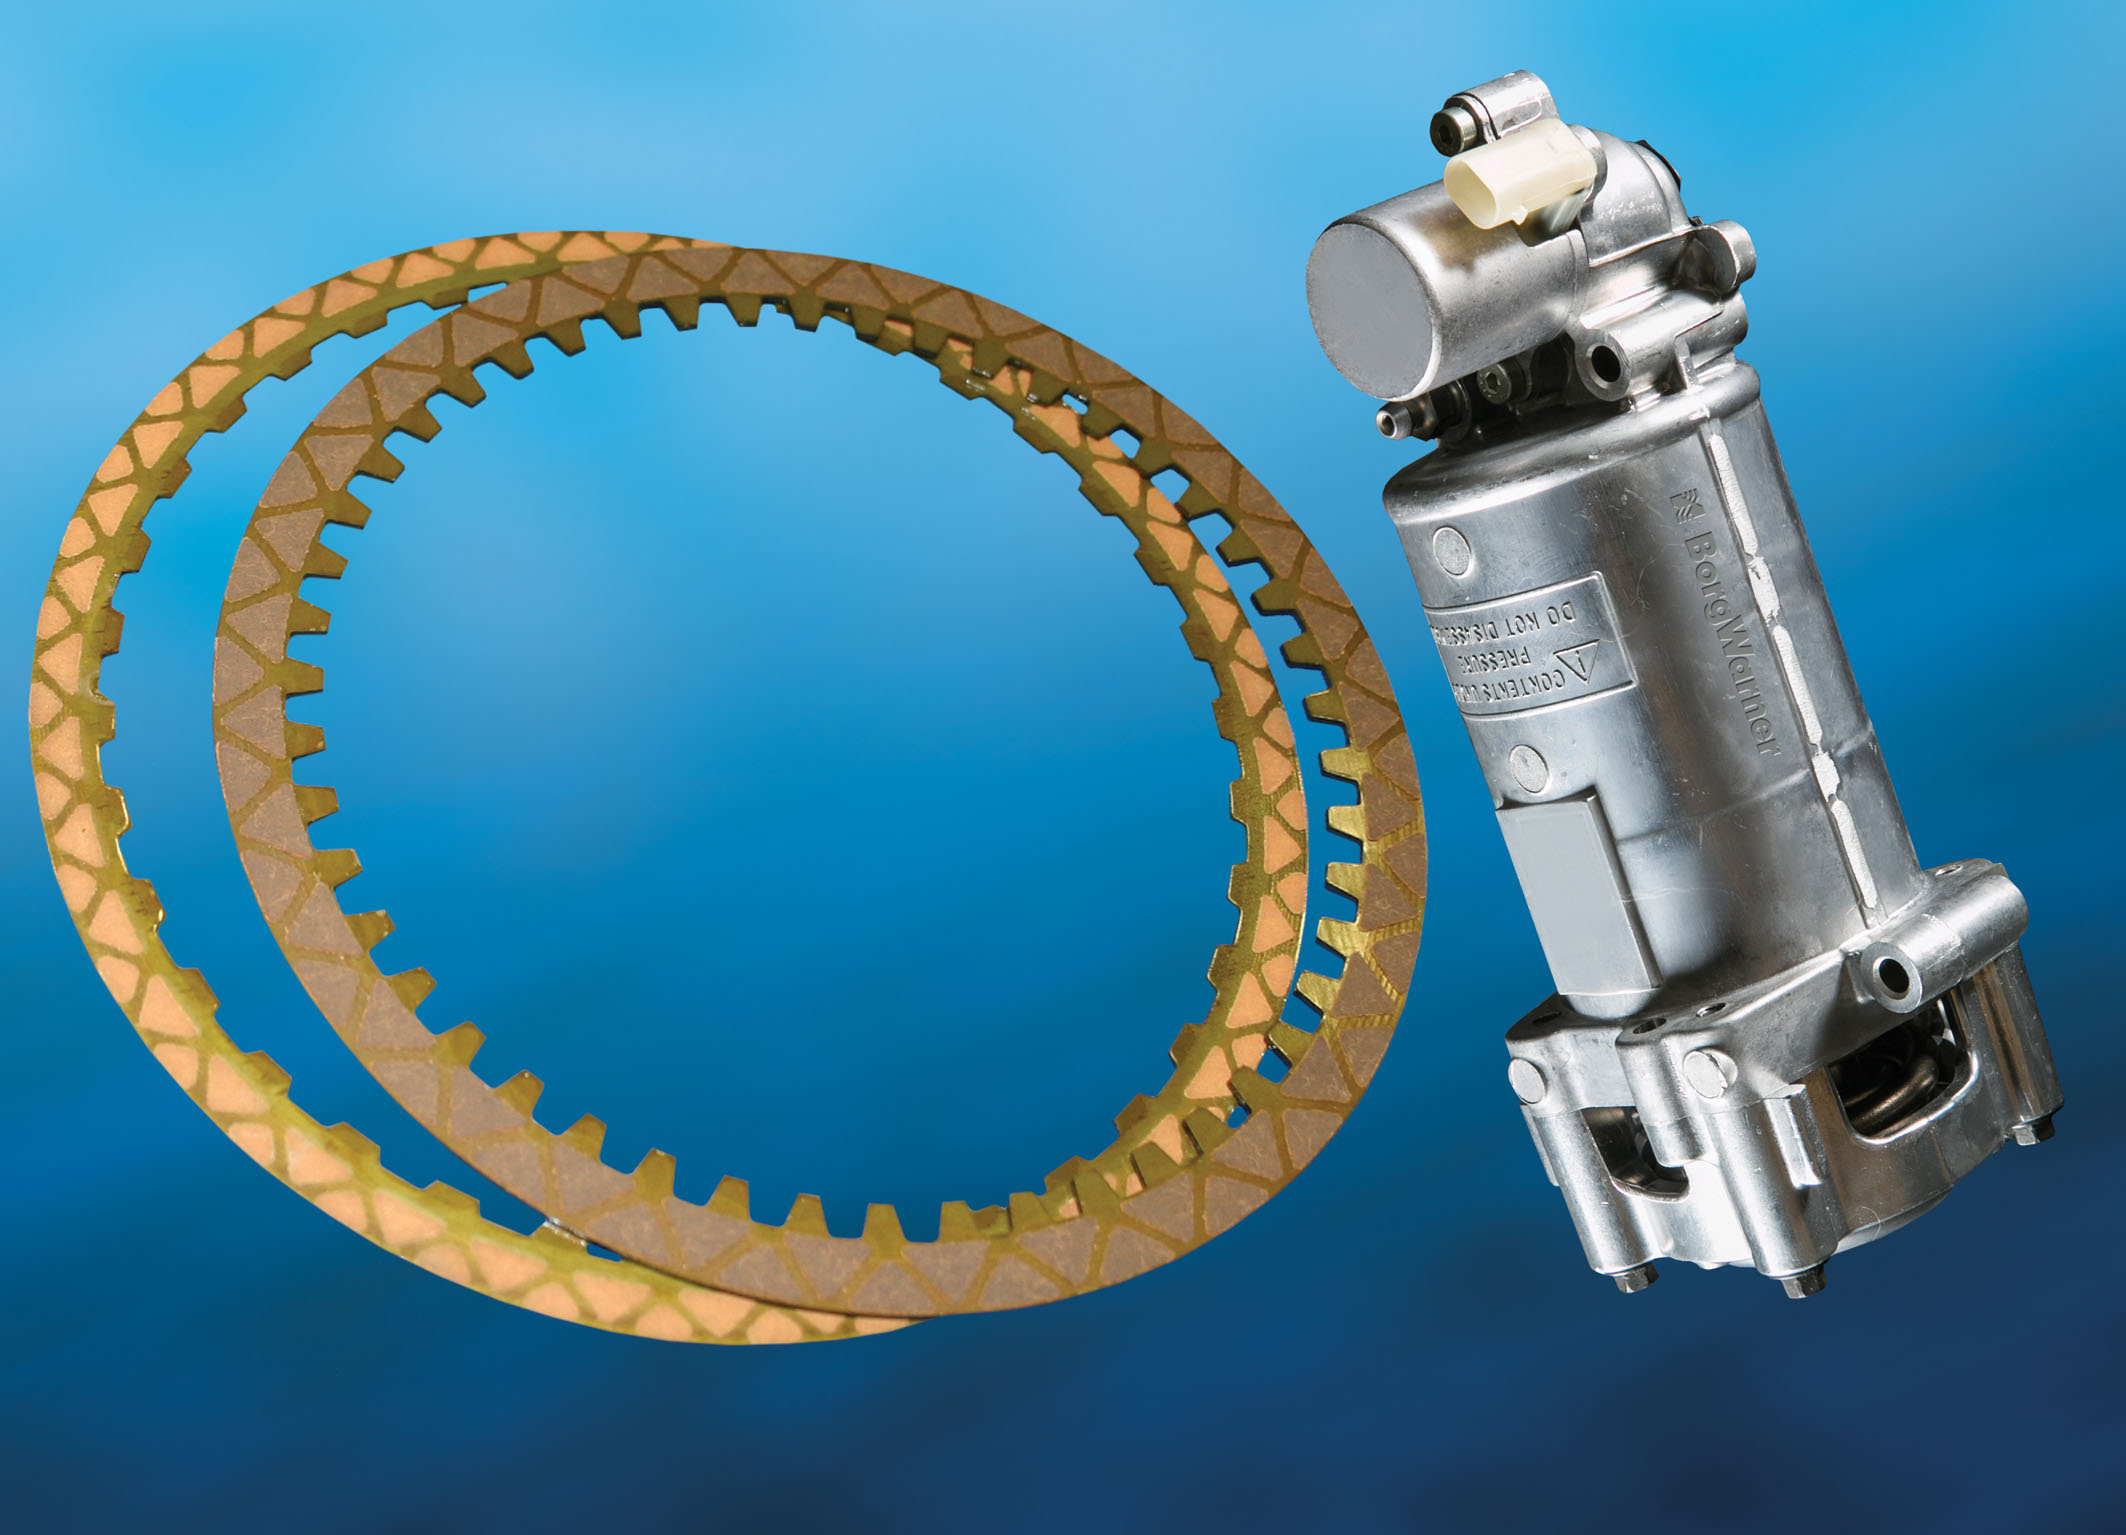 BorgWarner supplies multi-segment wet friction plates, hydraulic accumulators and Eco-Launch™ solenoid valves for GM’s new Hydra-Matic 8L45 automatic transmission. These advanced technologies contribute to improved shift feel and increased fuel economy.